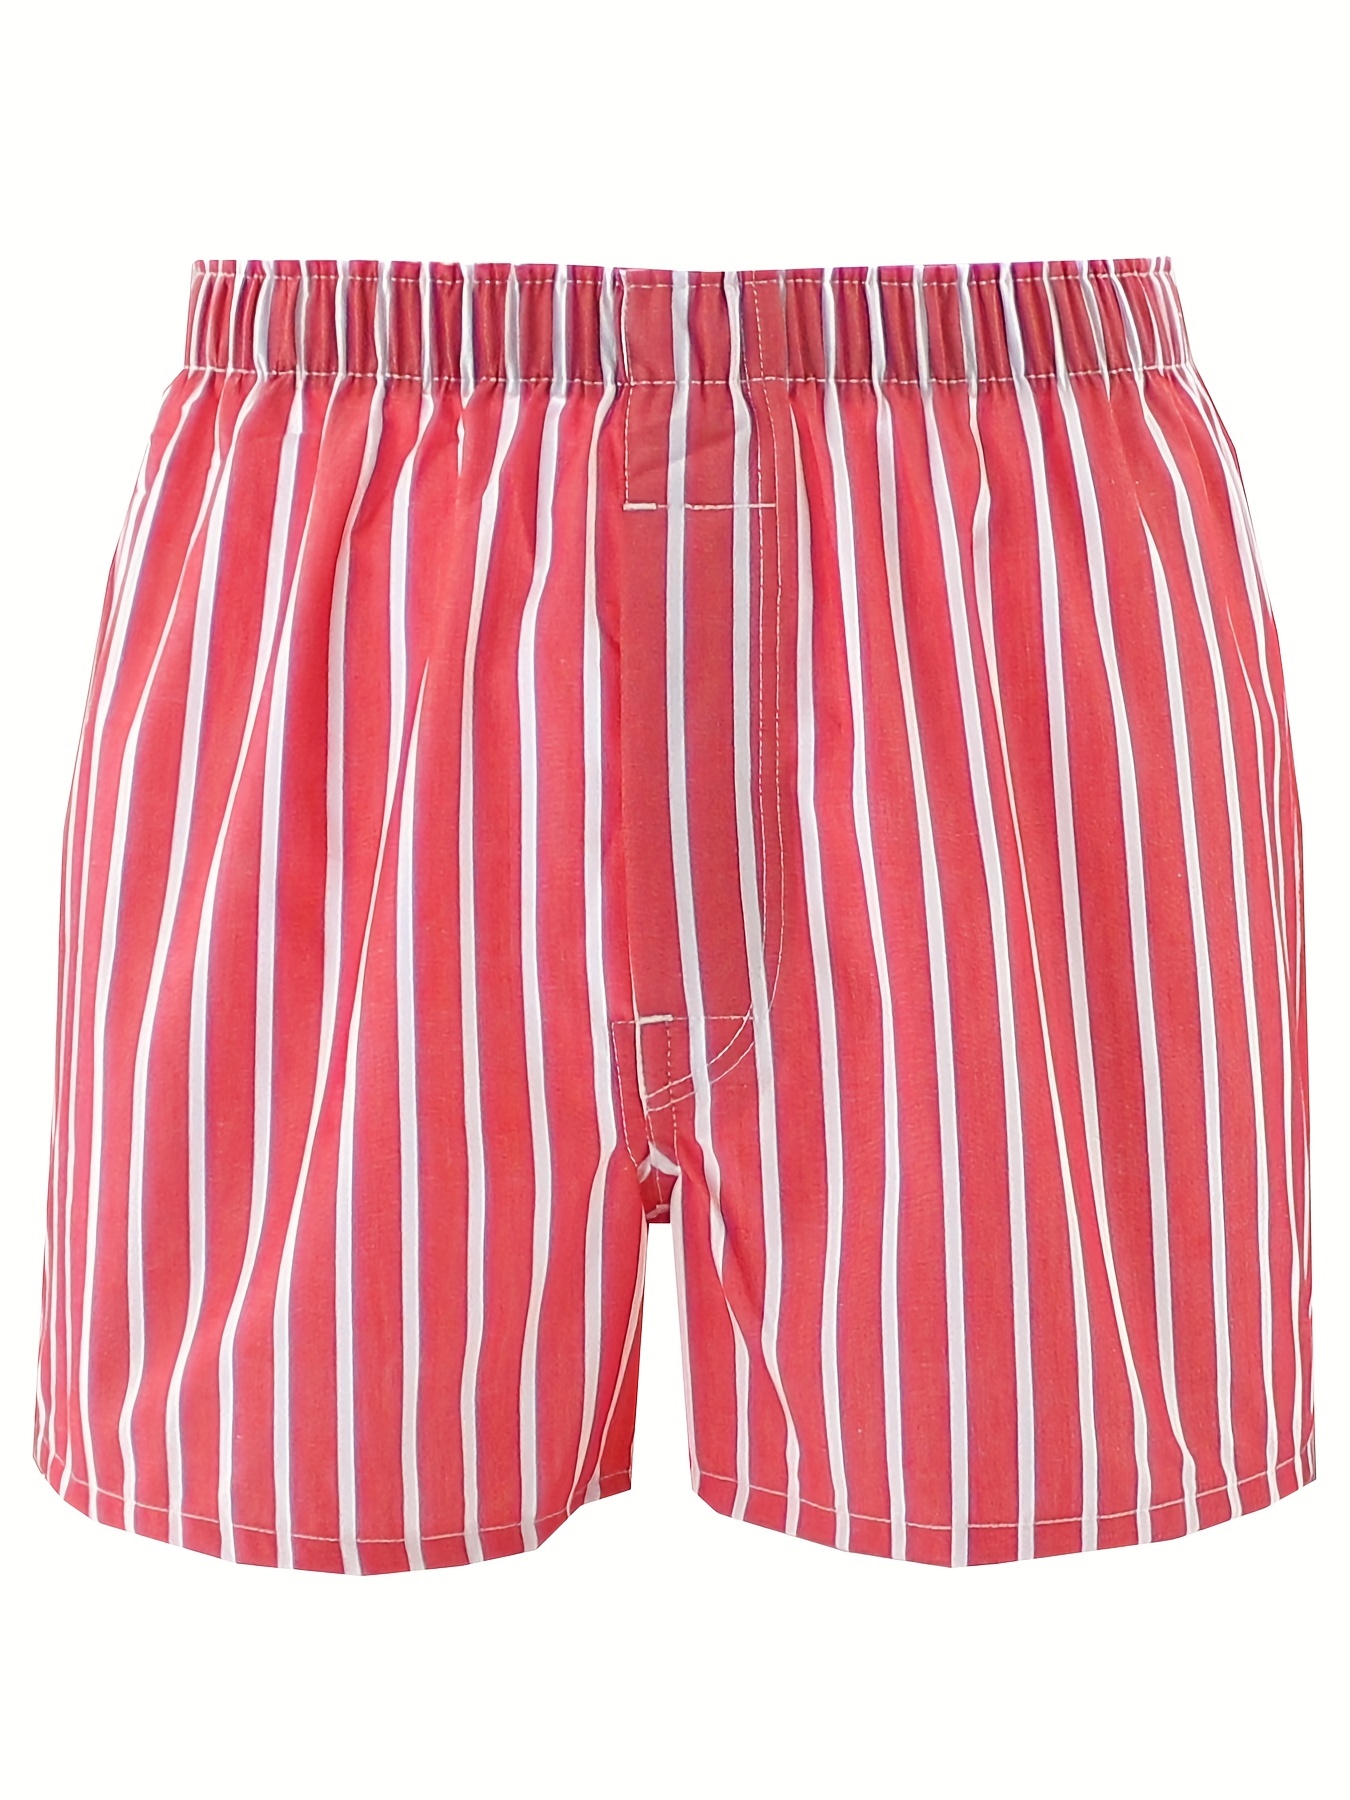 Breathable Striped Boxer Shorts For Men Soft And Smooth Cotton Underwear  With Print Design Perfect For Sleepwear And Striped Underpants X0825 From  Fashion_official01, $9.96